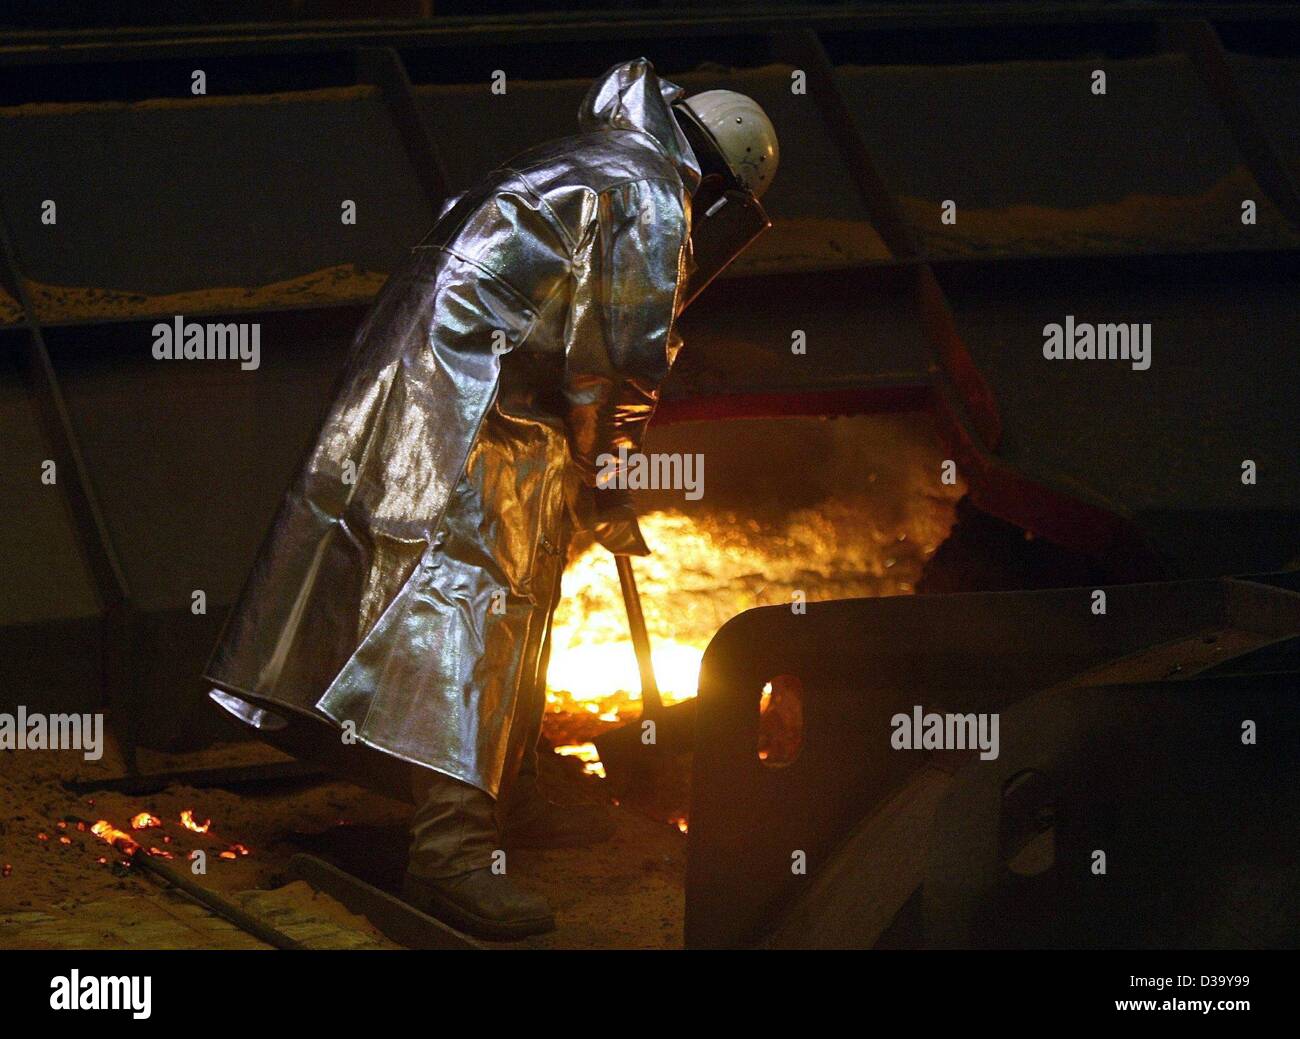 (dpa) - An employee works in a blast furnace at the ThyssenKrupp steelworks in Duisburg-Bruckhausen, western Germany, 1 September 2003. The factory manufactures steel parts which are used for the construction of cars, washing machines and wind turbines. 13,000 people are employed at ThyssenKrupp, an Stock Photo